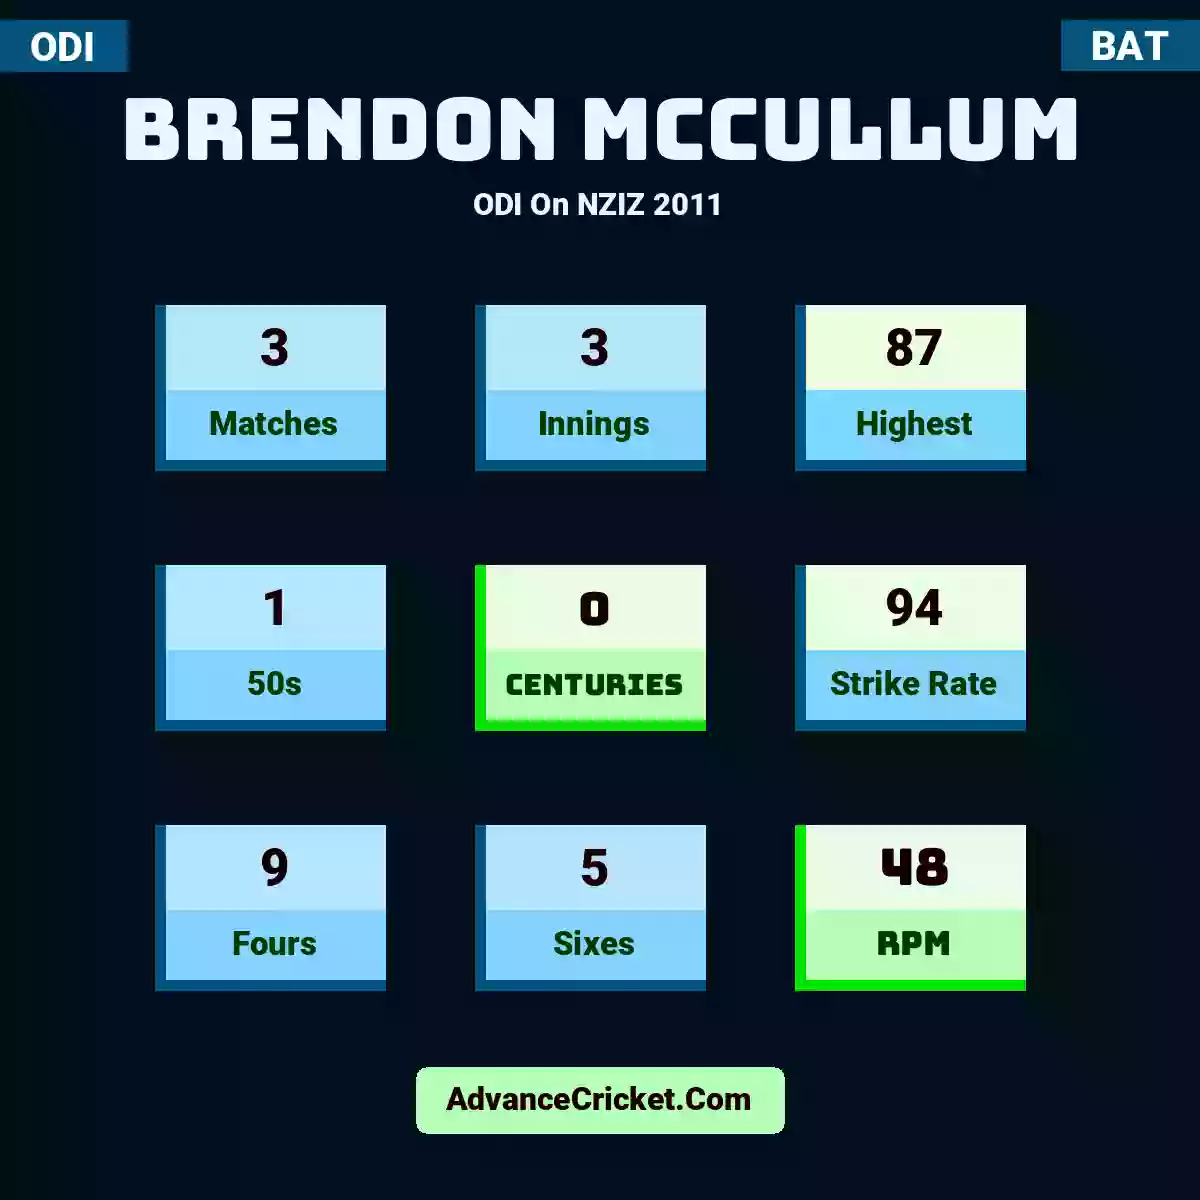 Brendon McCullum ODI  On NZIZ 2011, Brendon McCullum played 3 matches, scored 87 runs as highest, 1 half-centuries, and 0 centuries, with a strike rate of 94. B.McCullum hit 9 fours and 5 sixes, with an RPM of 48.